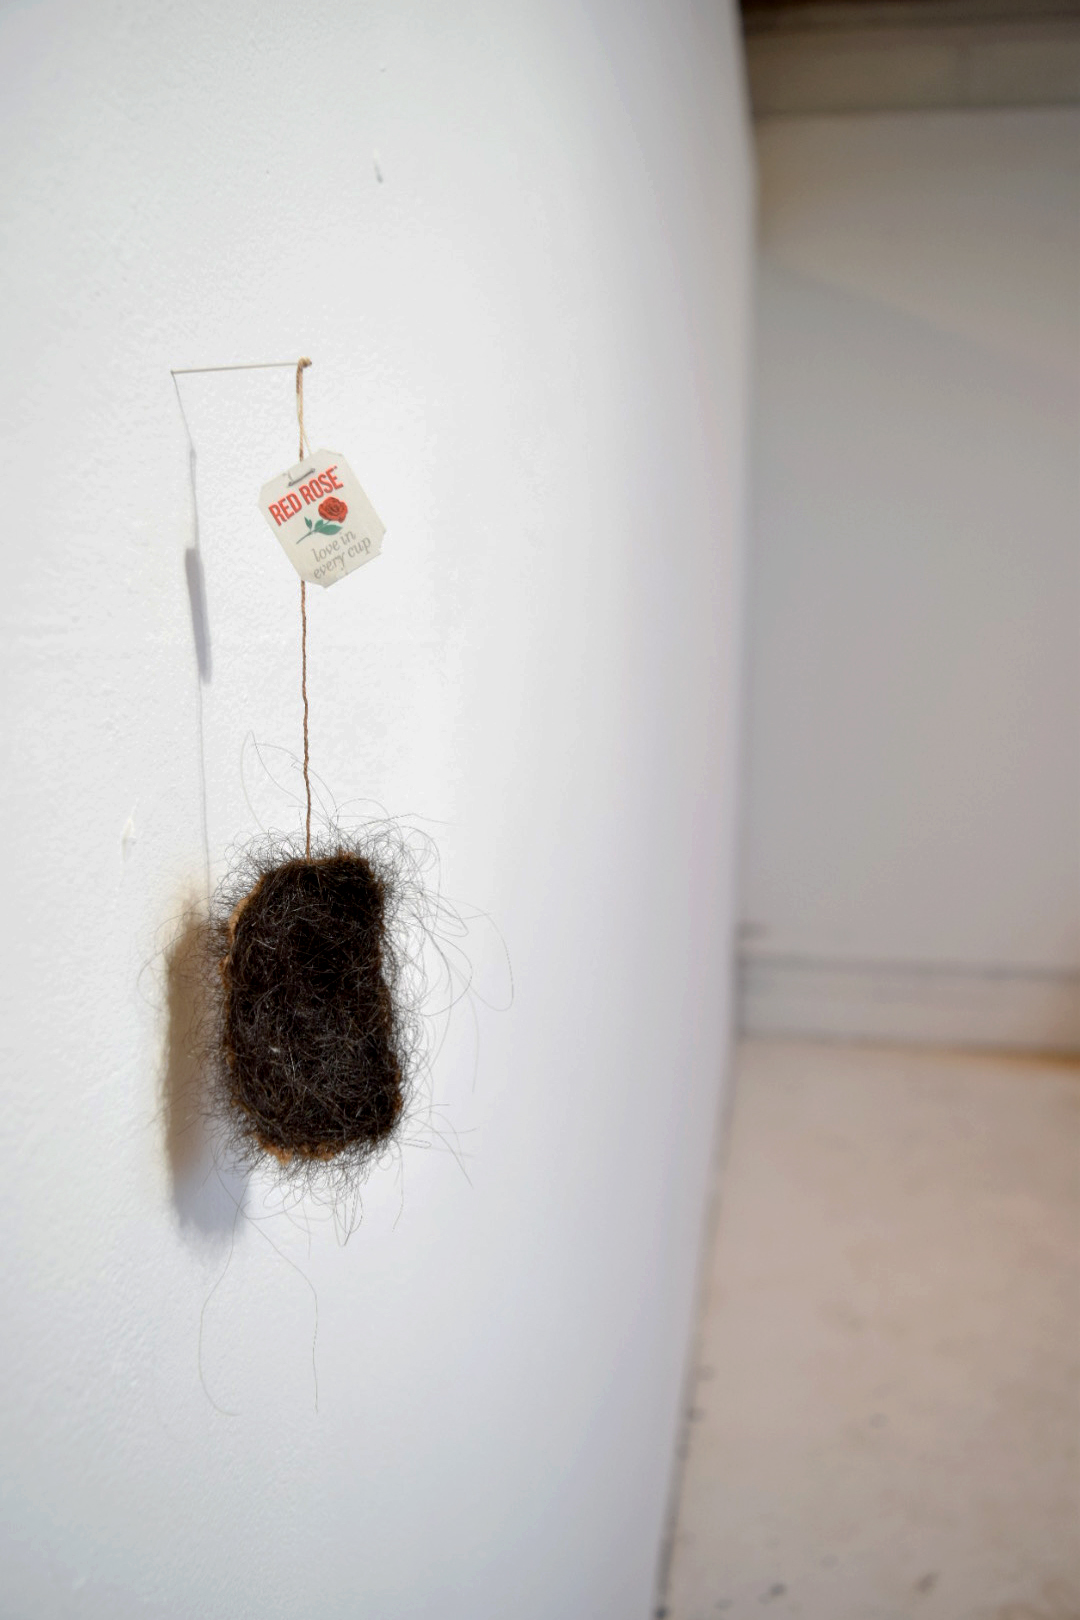 Photograph of a tea bag stitched and covered completely with dark hair. The hair protrudes from the tea bag messily. that has been suspended from a pin on a white and otherwise empty wall. The tea bag tag has very small writing.